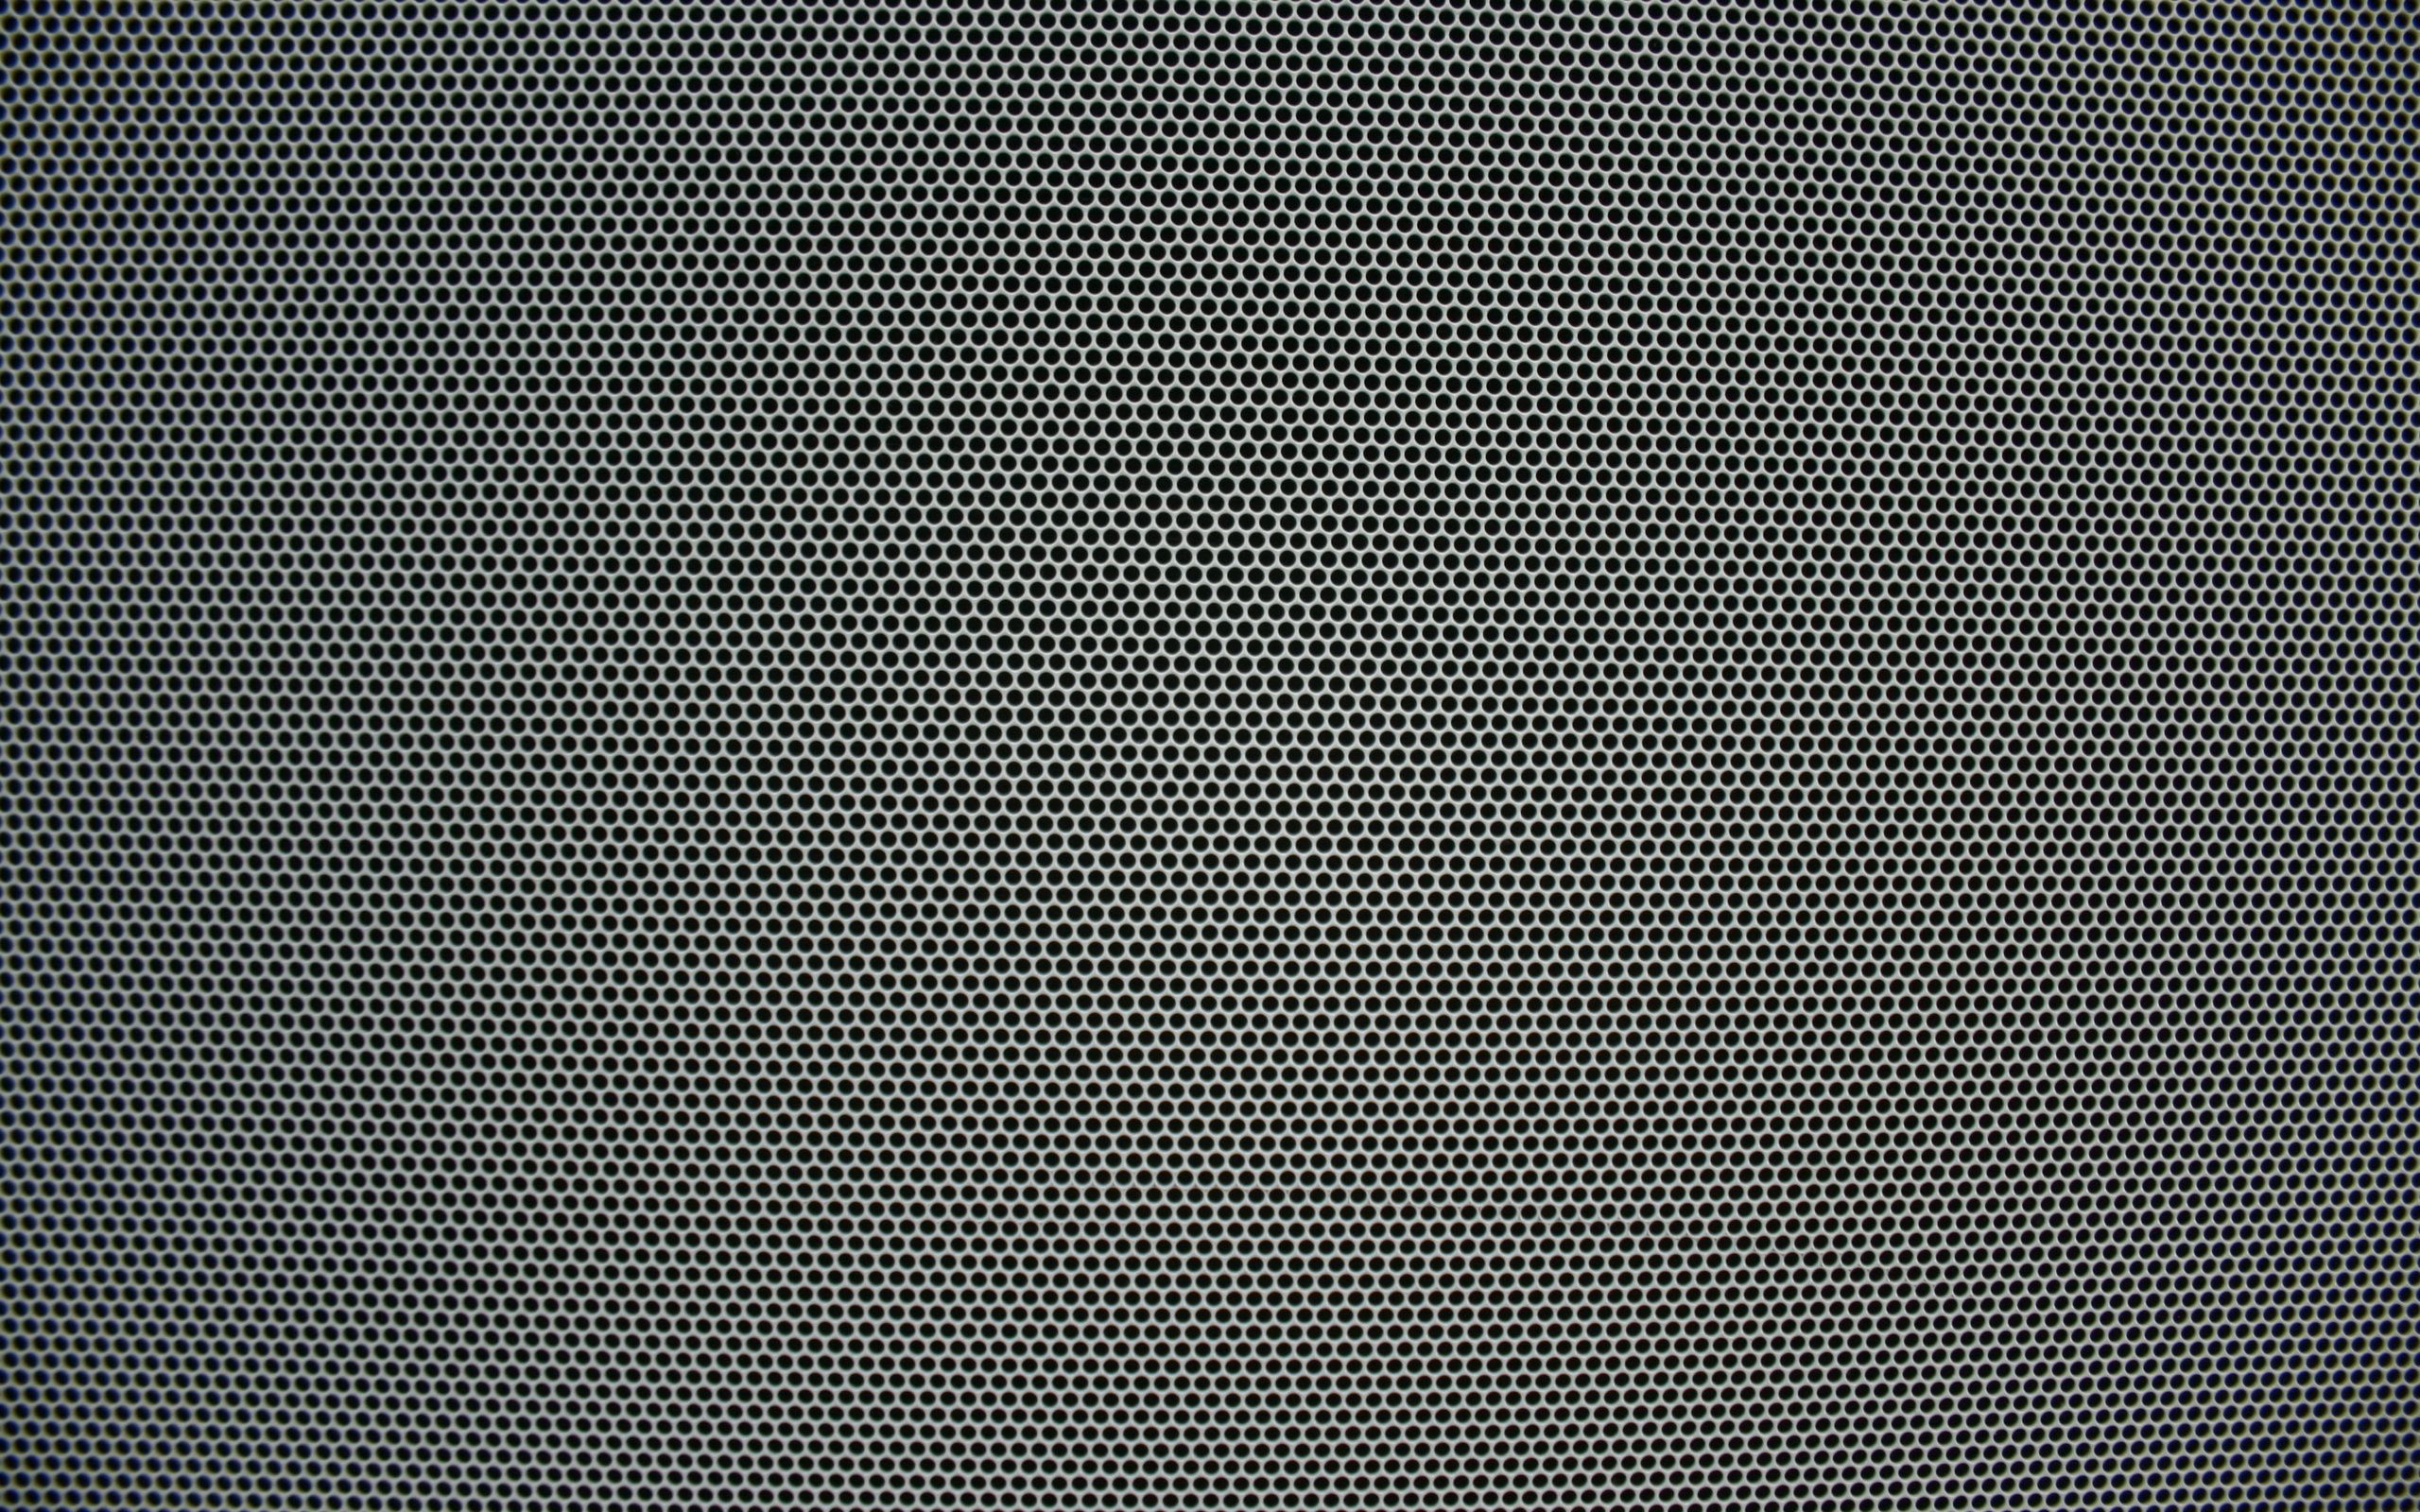 circles, grid, texture, textures, metal, silver, holes wallpapers for tablet